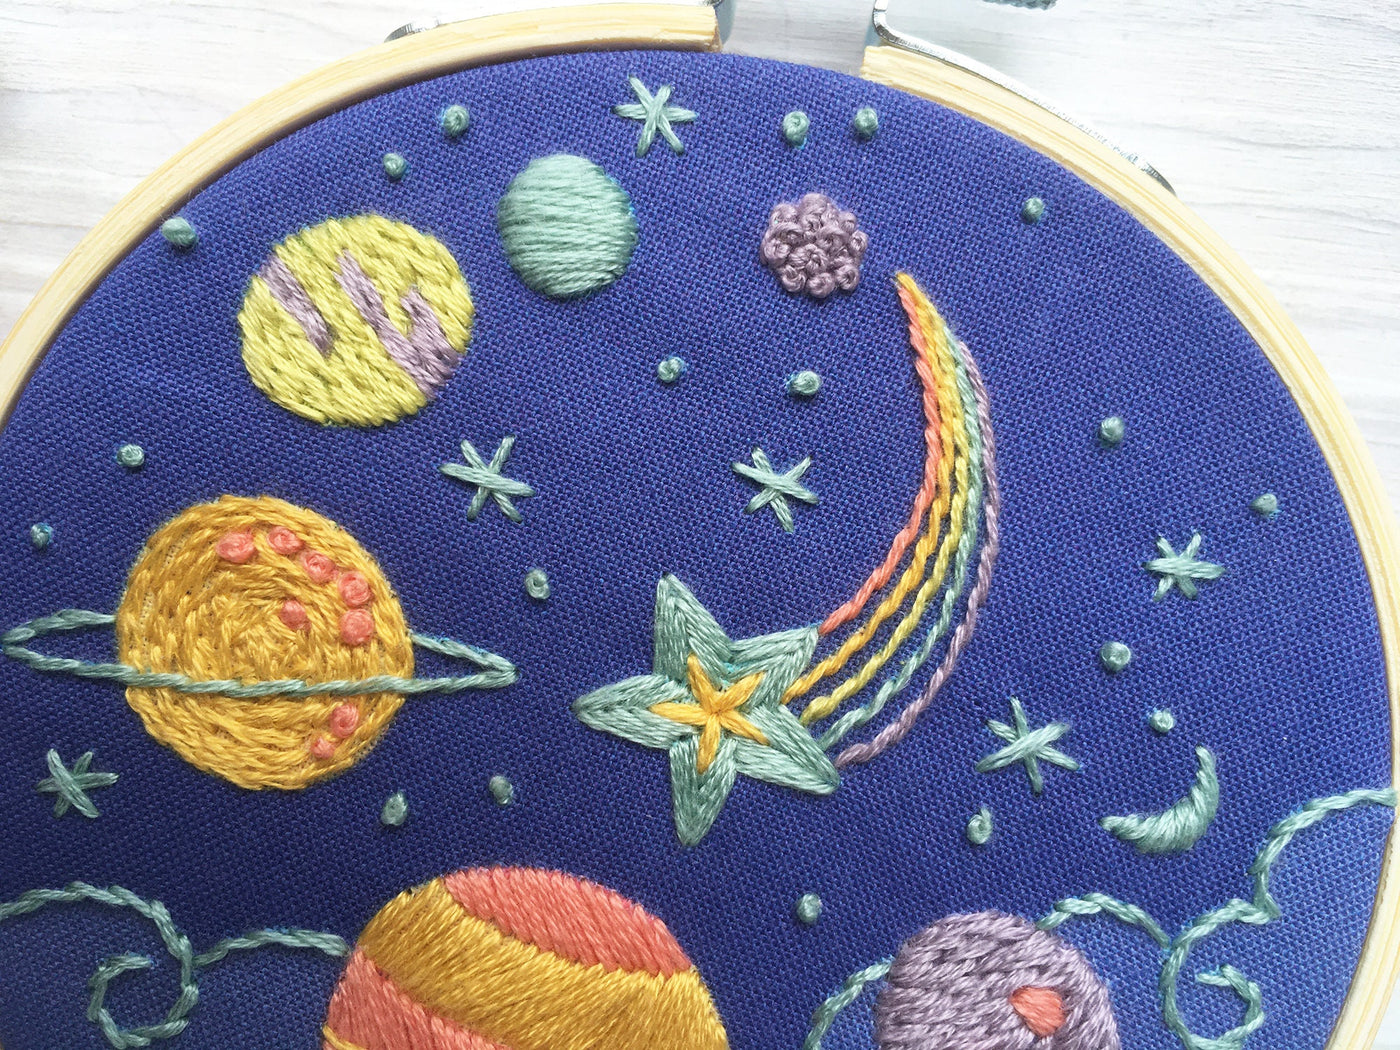 Planets and Stars Hand Embroidery pattern download